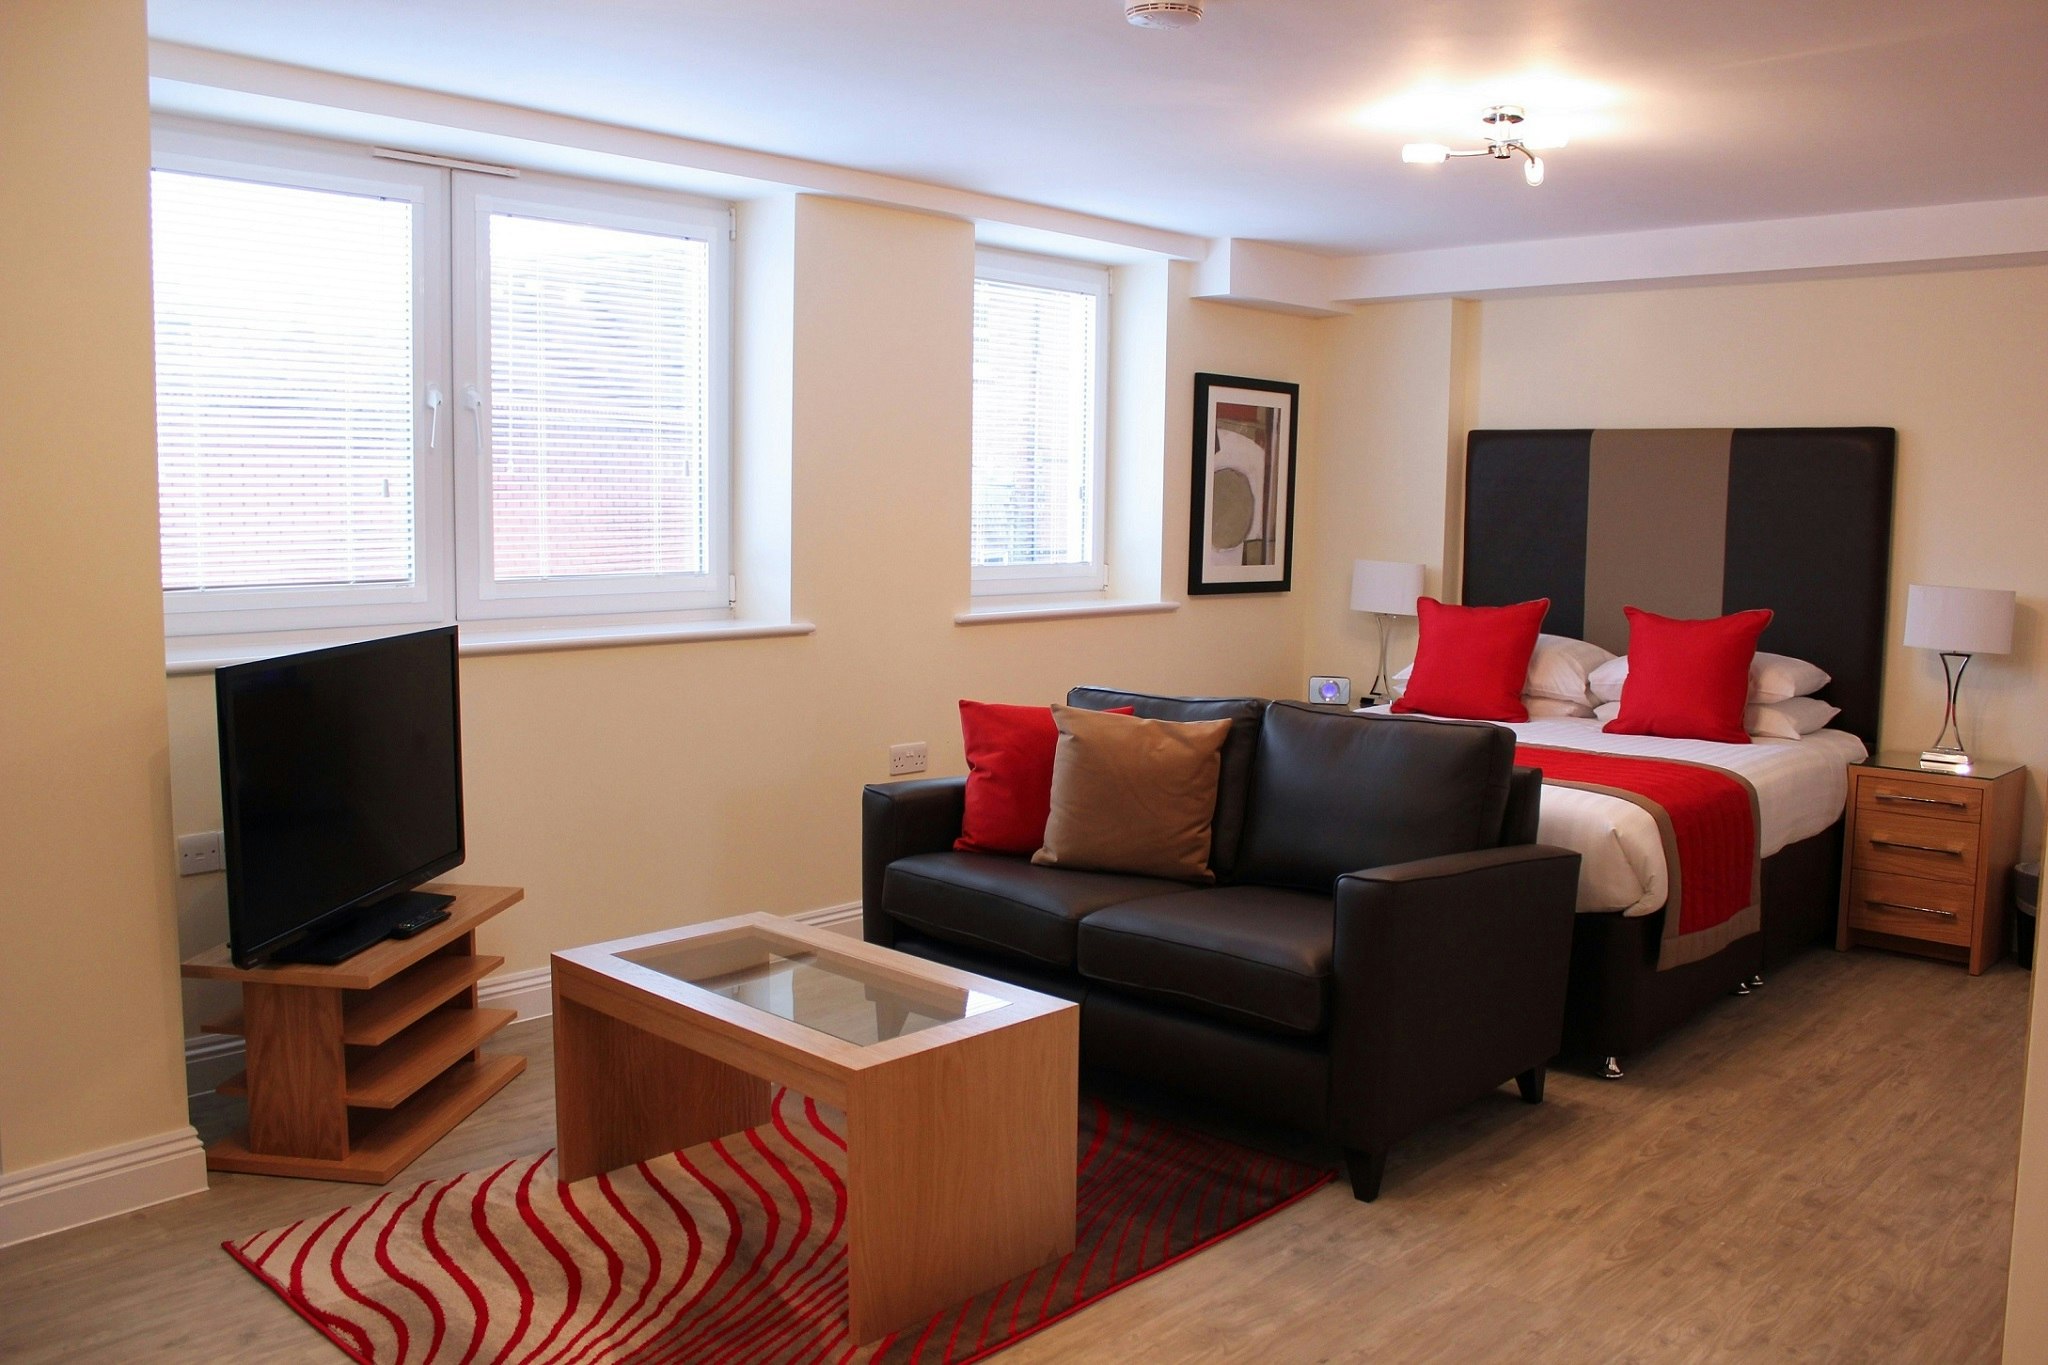 A double bed with white linen and red cushions with two bedside tables. A sofa sits at the end of the bed with a coffee table in front and a tv and tv stand in the corner of the room.